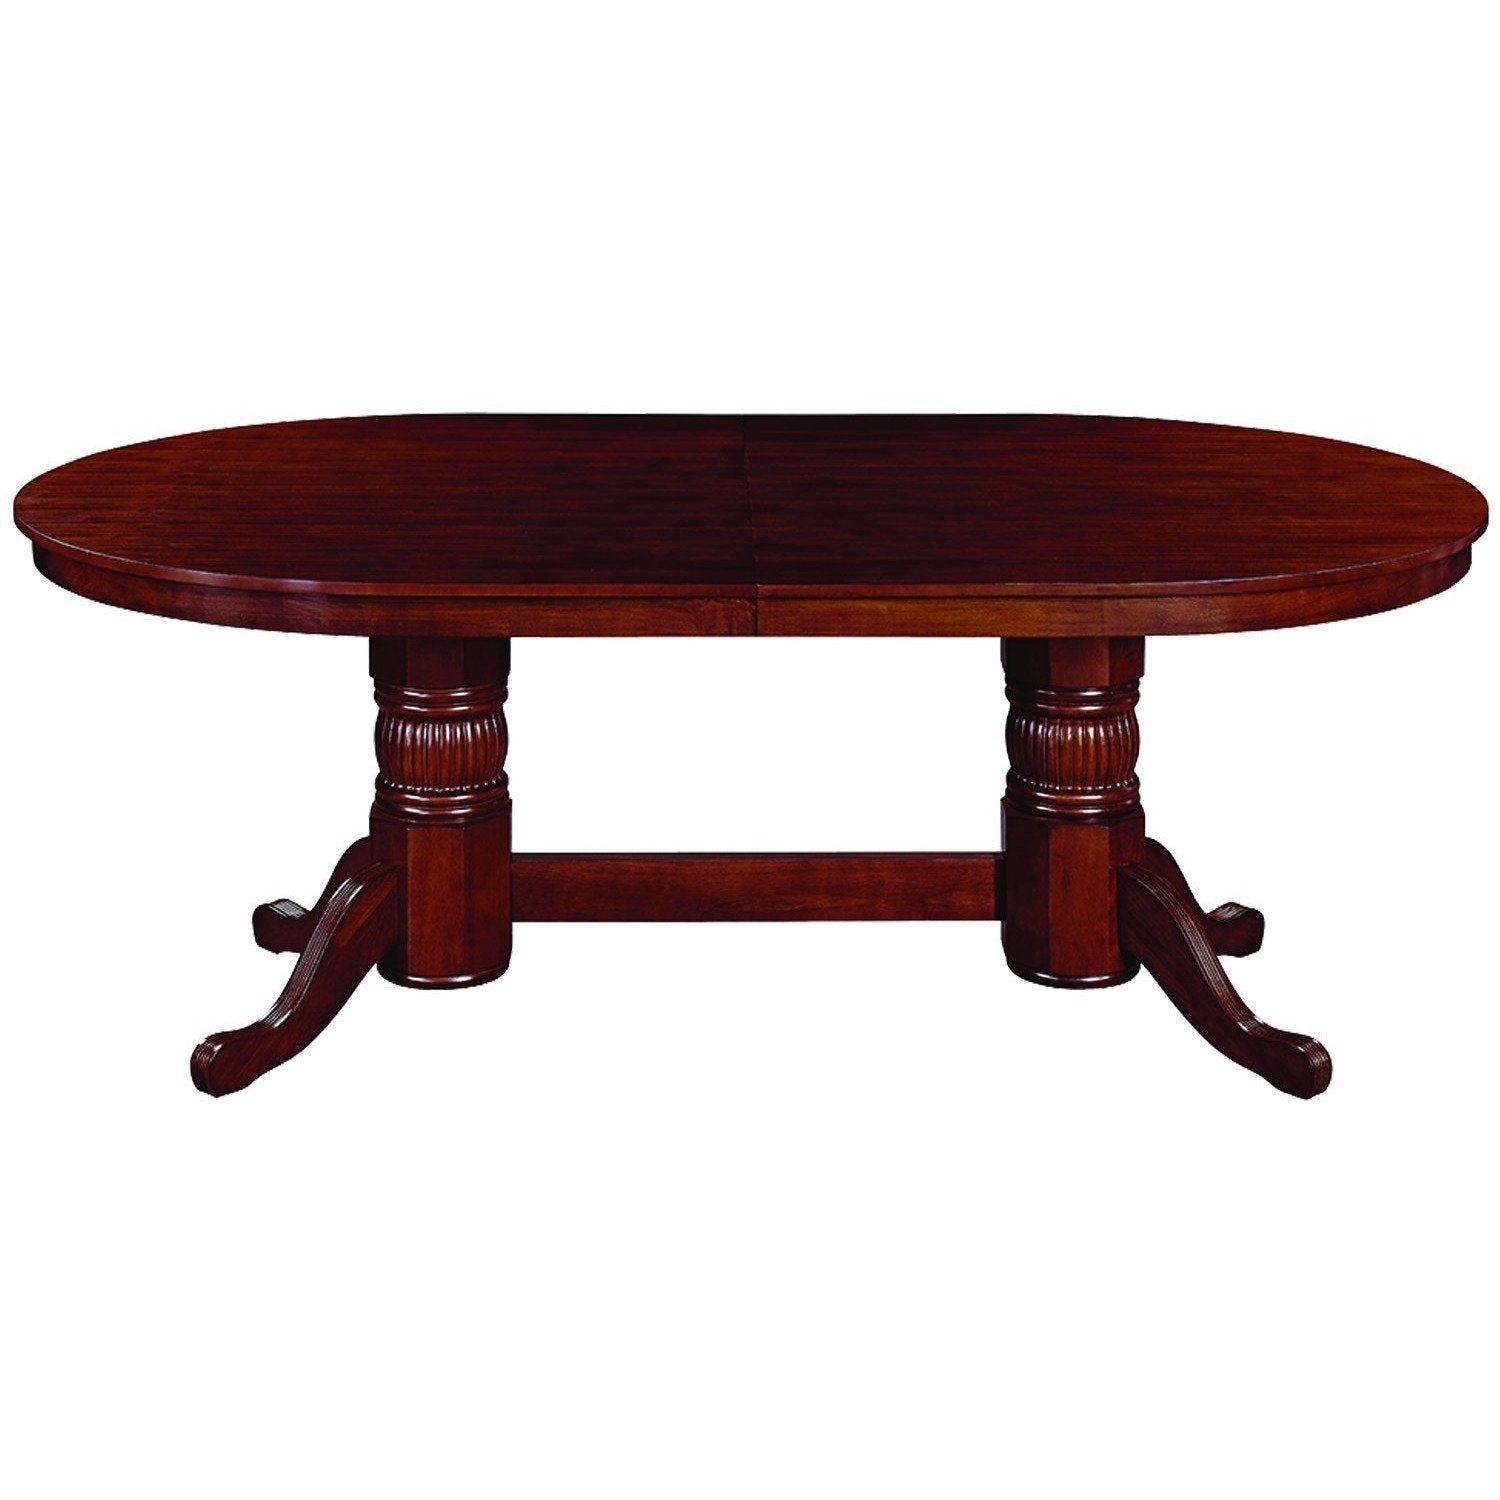 ram game room gtbl84-tw texas holdem game table English Tudor with dining top full cover